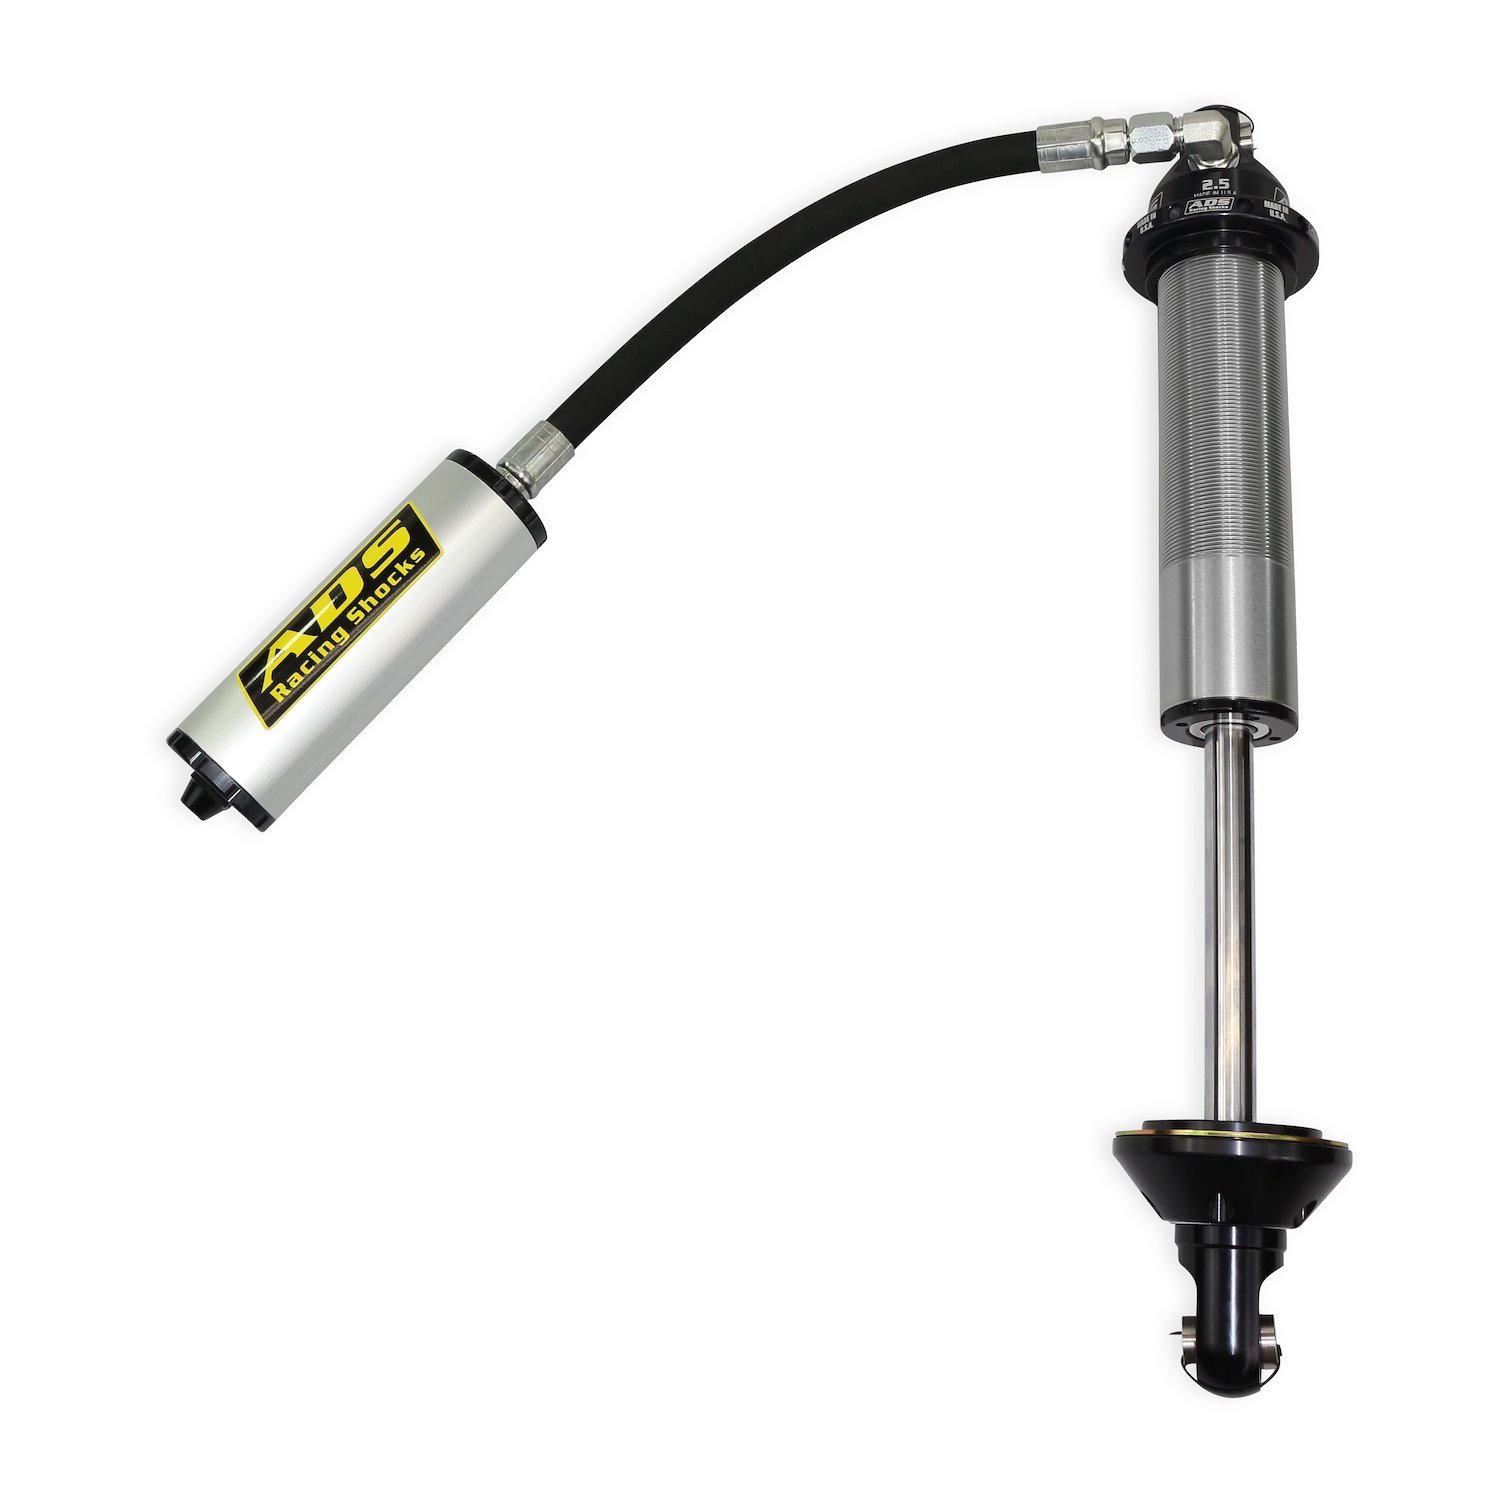 250-COS08-1R9 Coil-Over Race Shock, 2.5 in. x 8 in. Stroke, w/ Remote Reservoir (90-Degree Hose), +1 in. Rod End